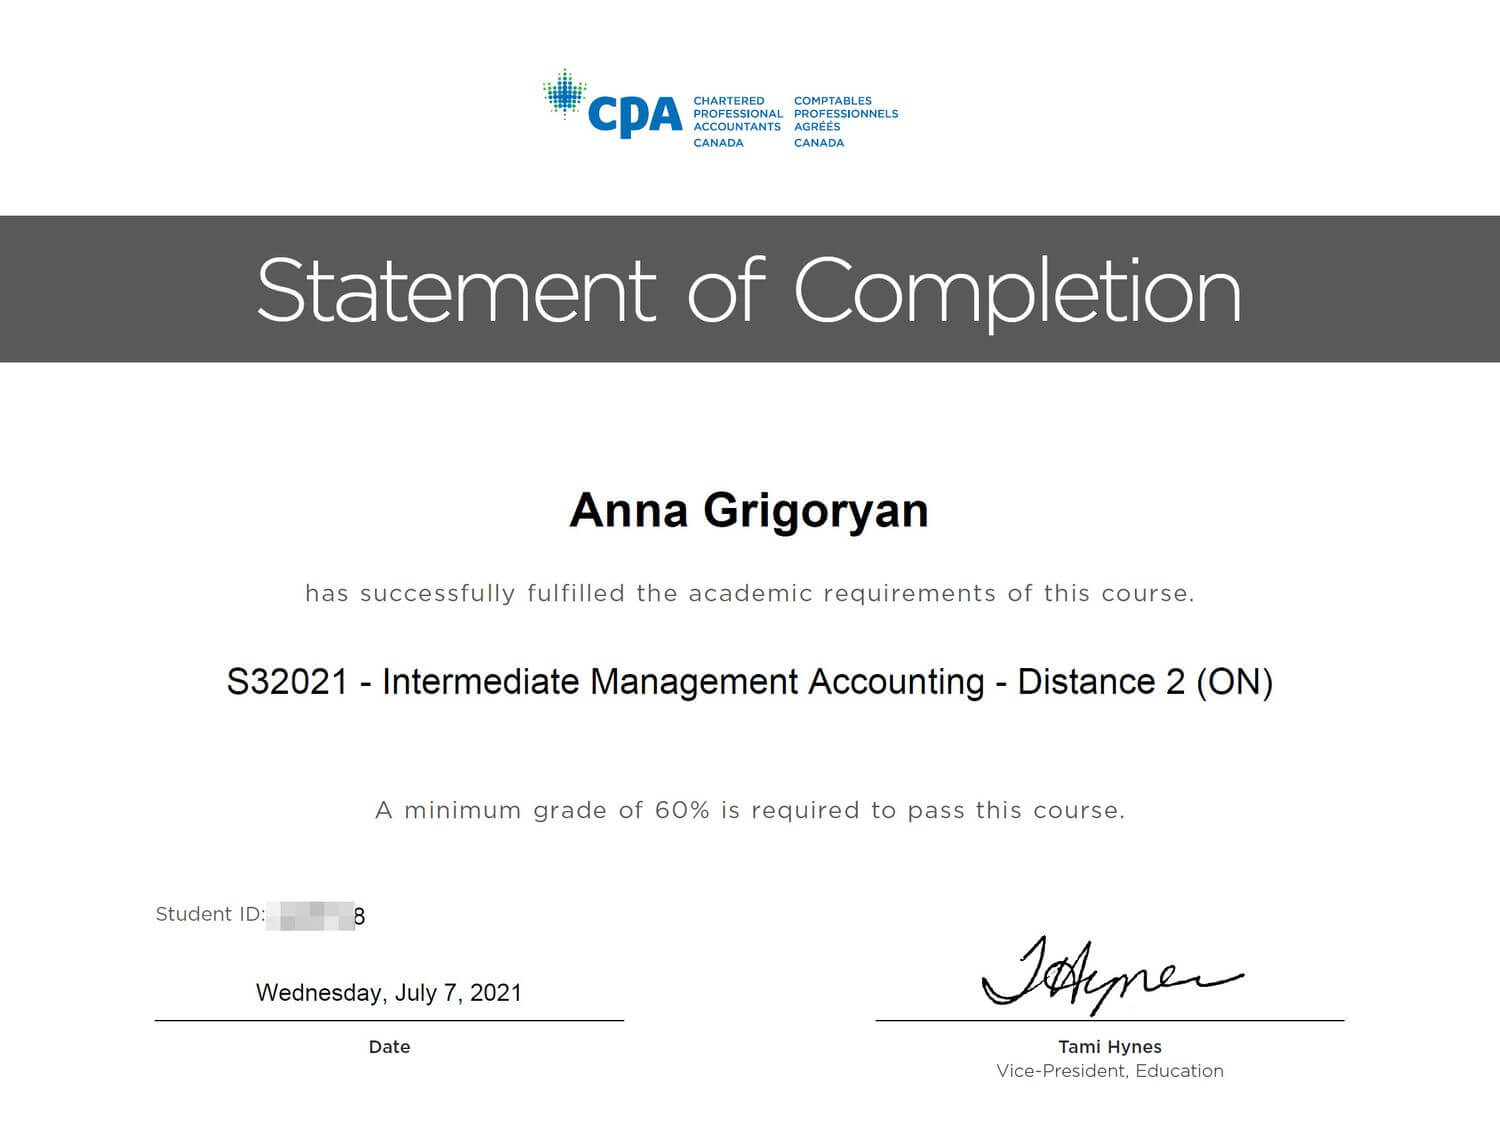 Management Accounting CPA certificate for corporate accountant Anna